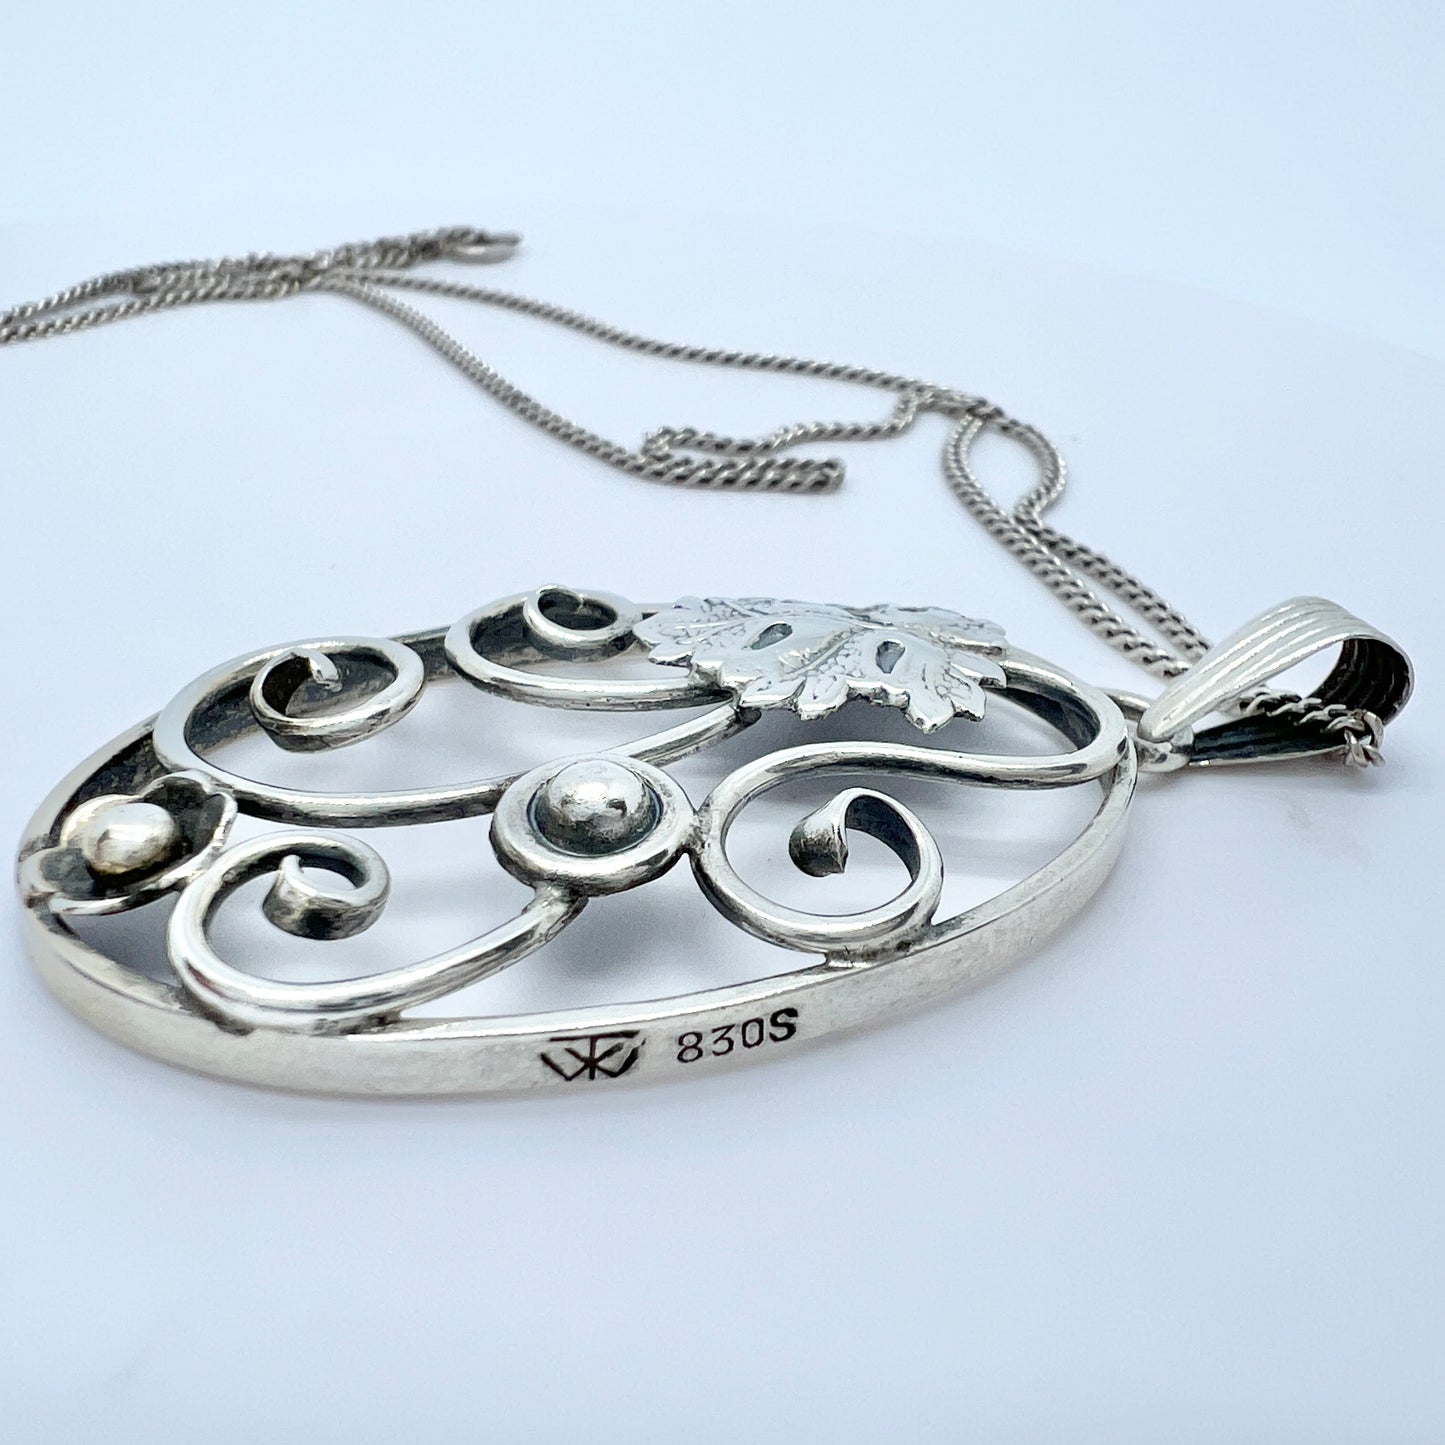 Denmark 1940-50s. Vintage Solid Silver Pendant + Chain.